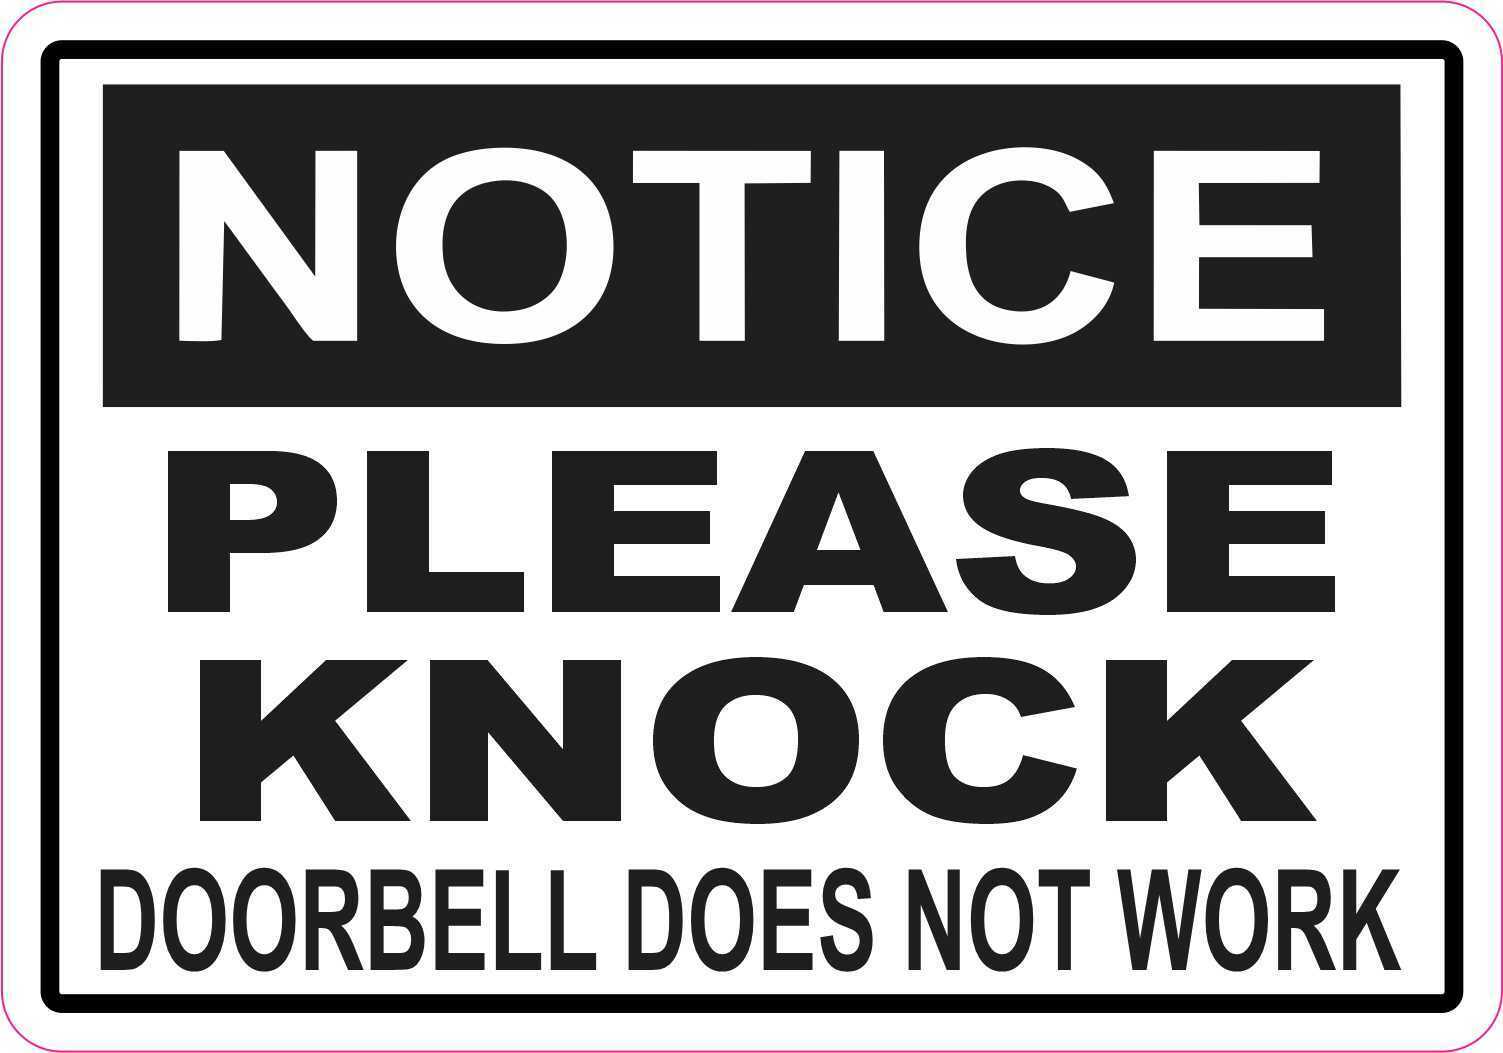 5in x 3.5in Doorbell Does Not Work Please Knock Magnet Magnetic Business Sign